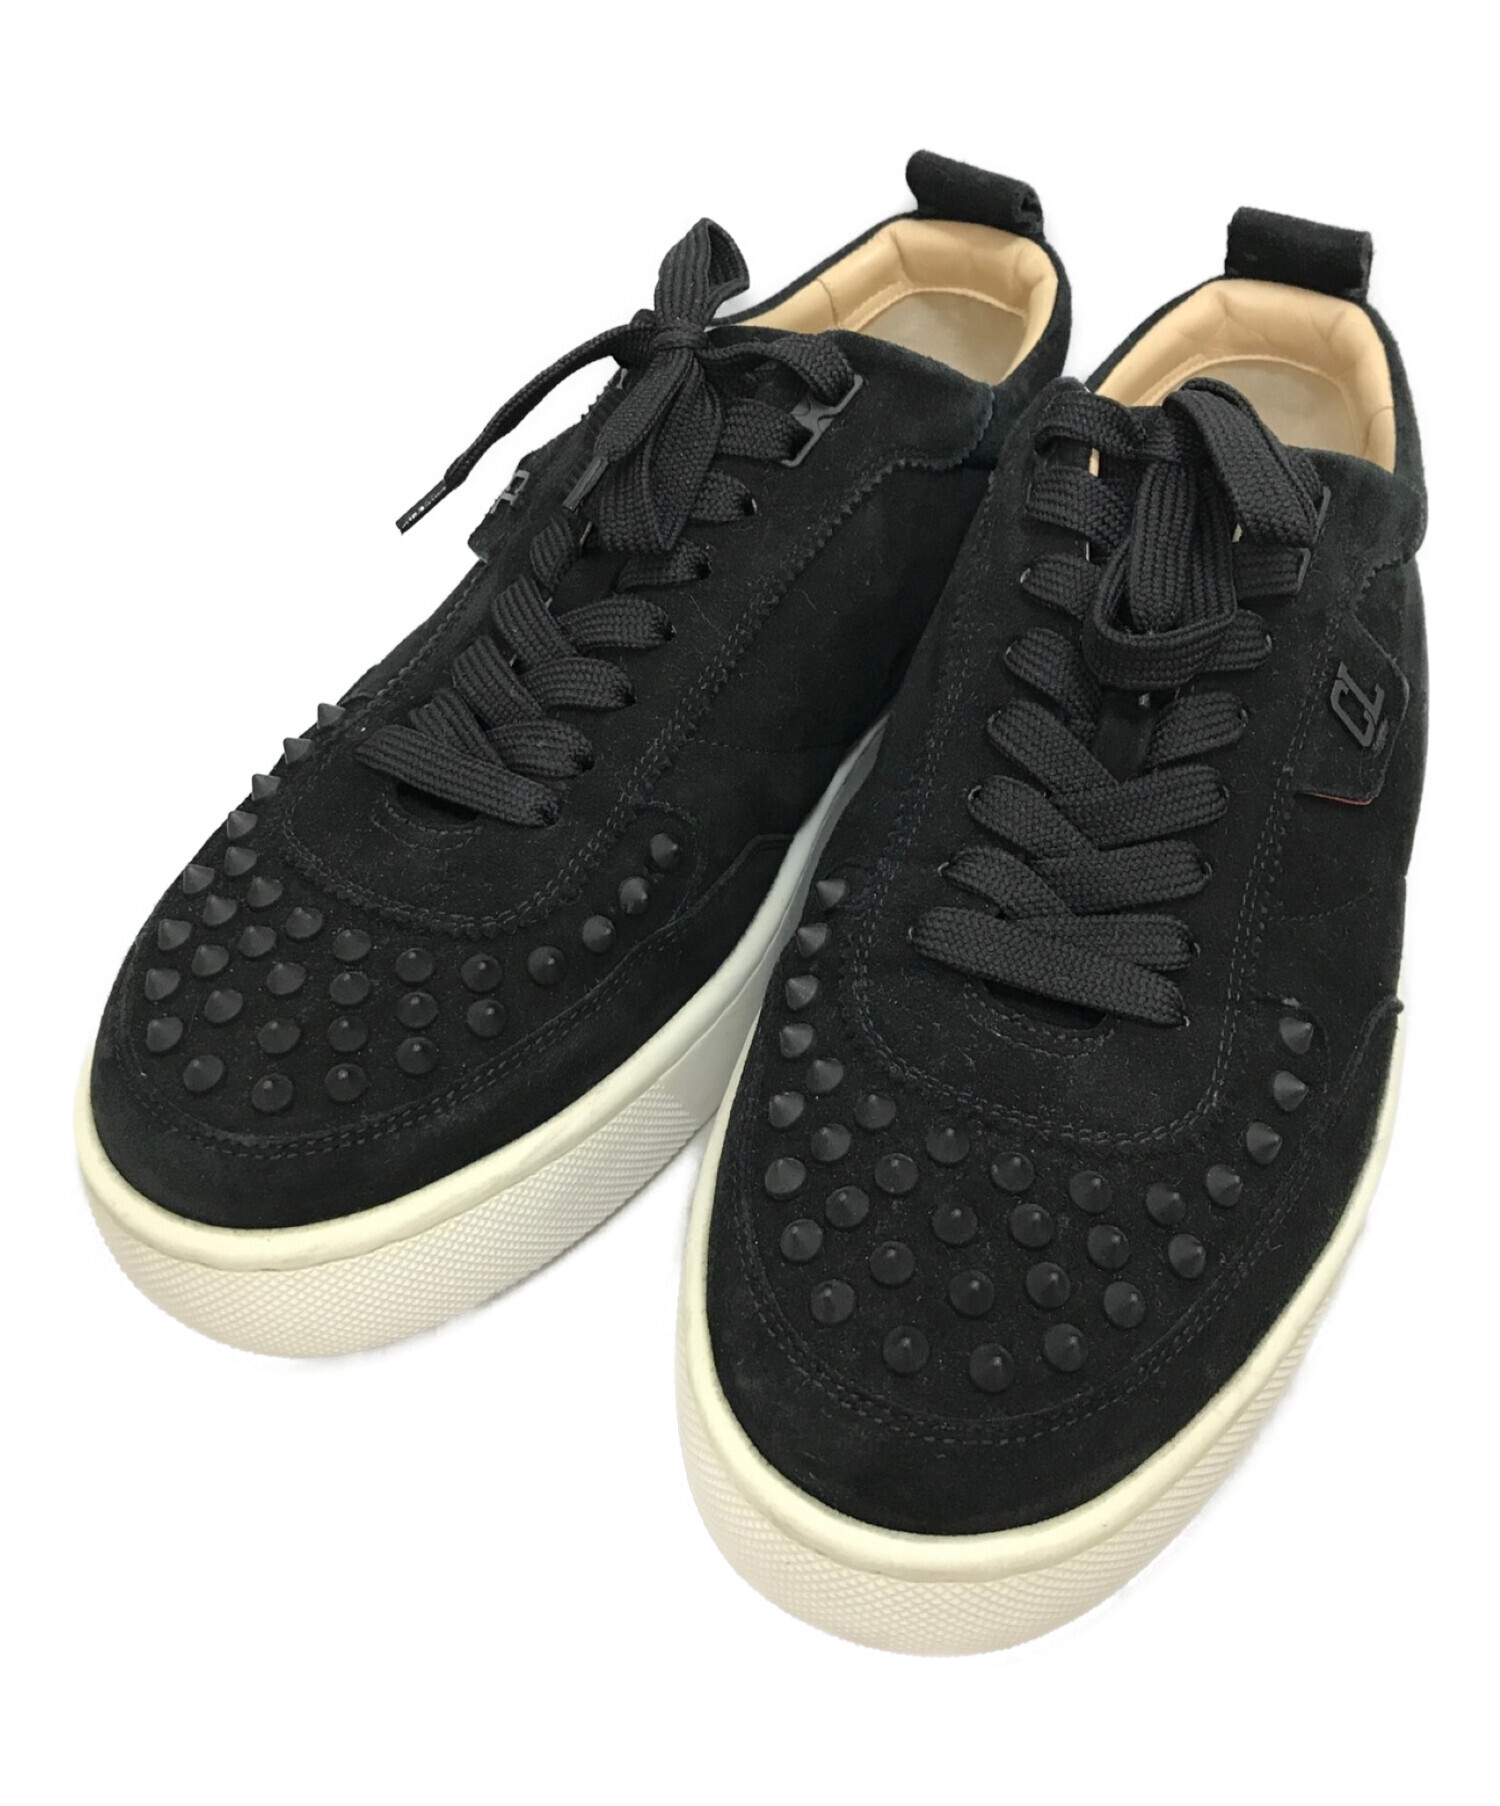 Christian Louboutin (クリスチャン・ルブタン) Happyrui Spiked Suede Sneakers ブラック  サイズ:41 1/2